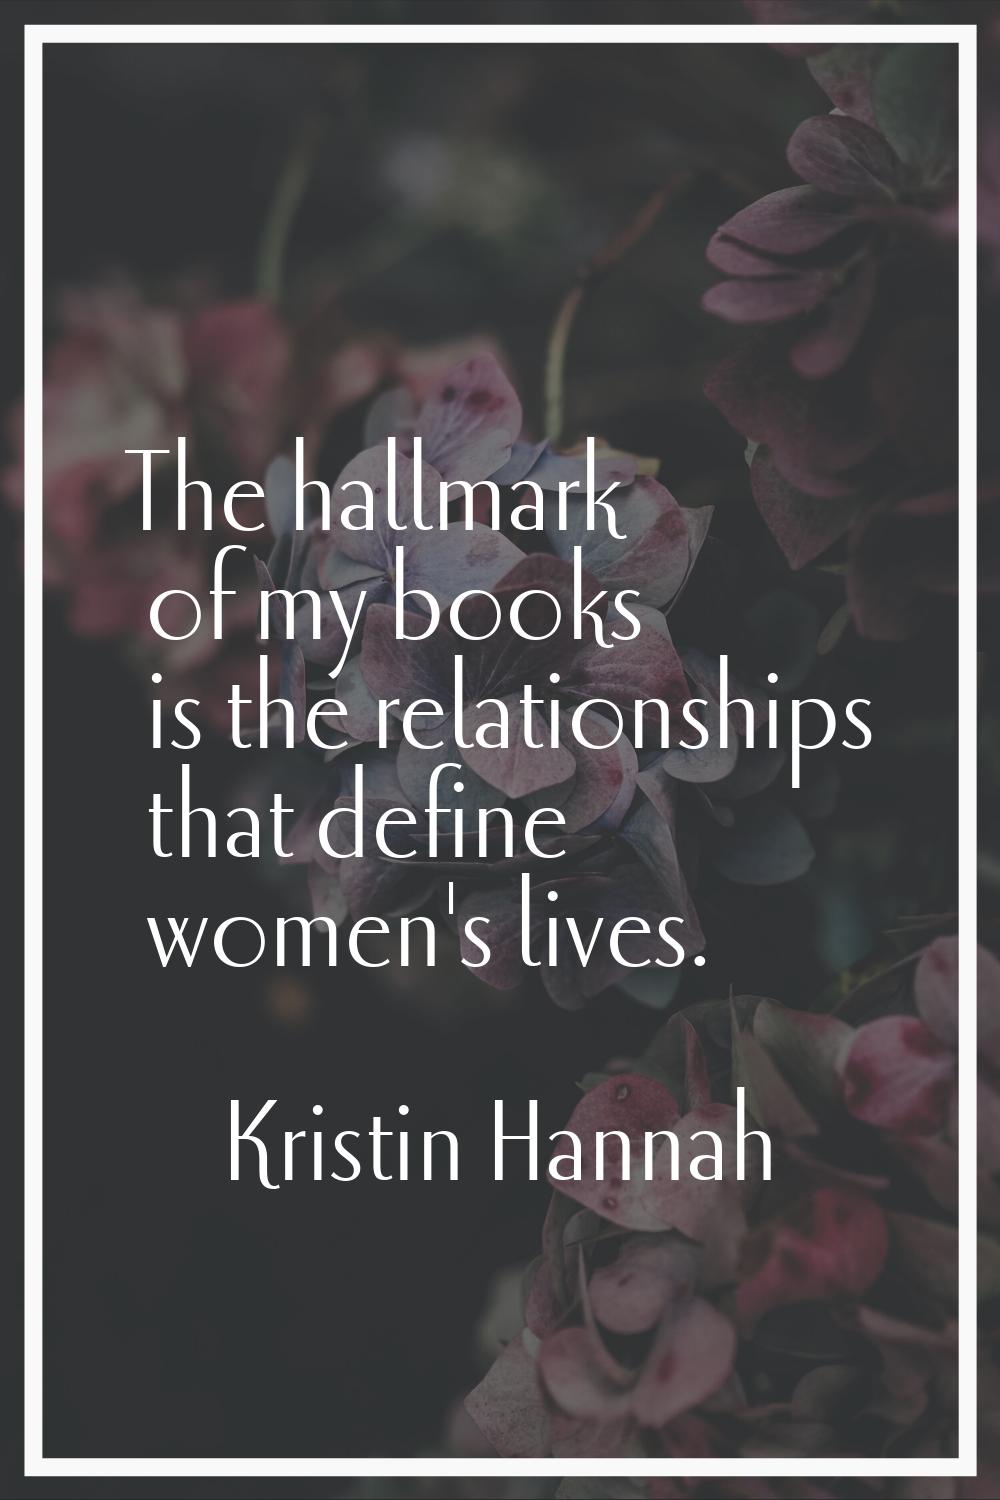 The hallmark of my books is the relationships that define women's lives.